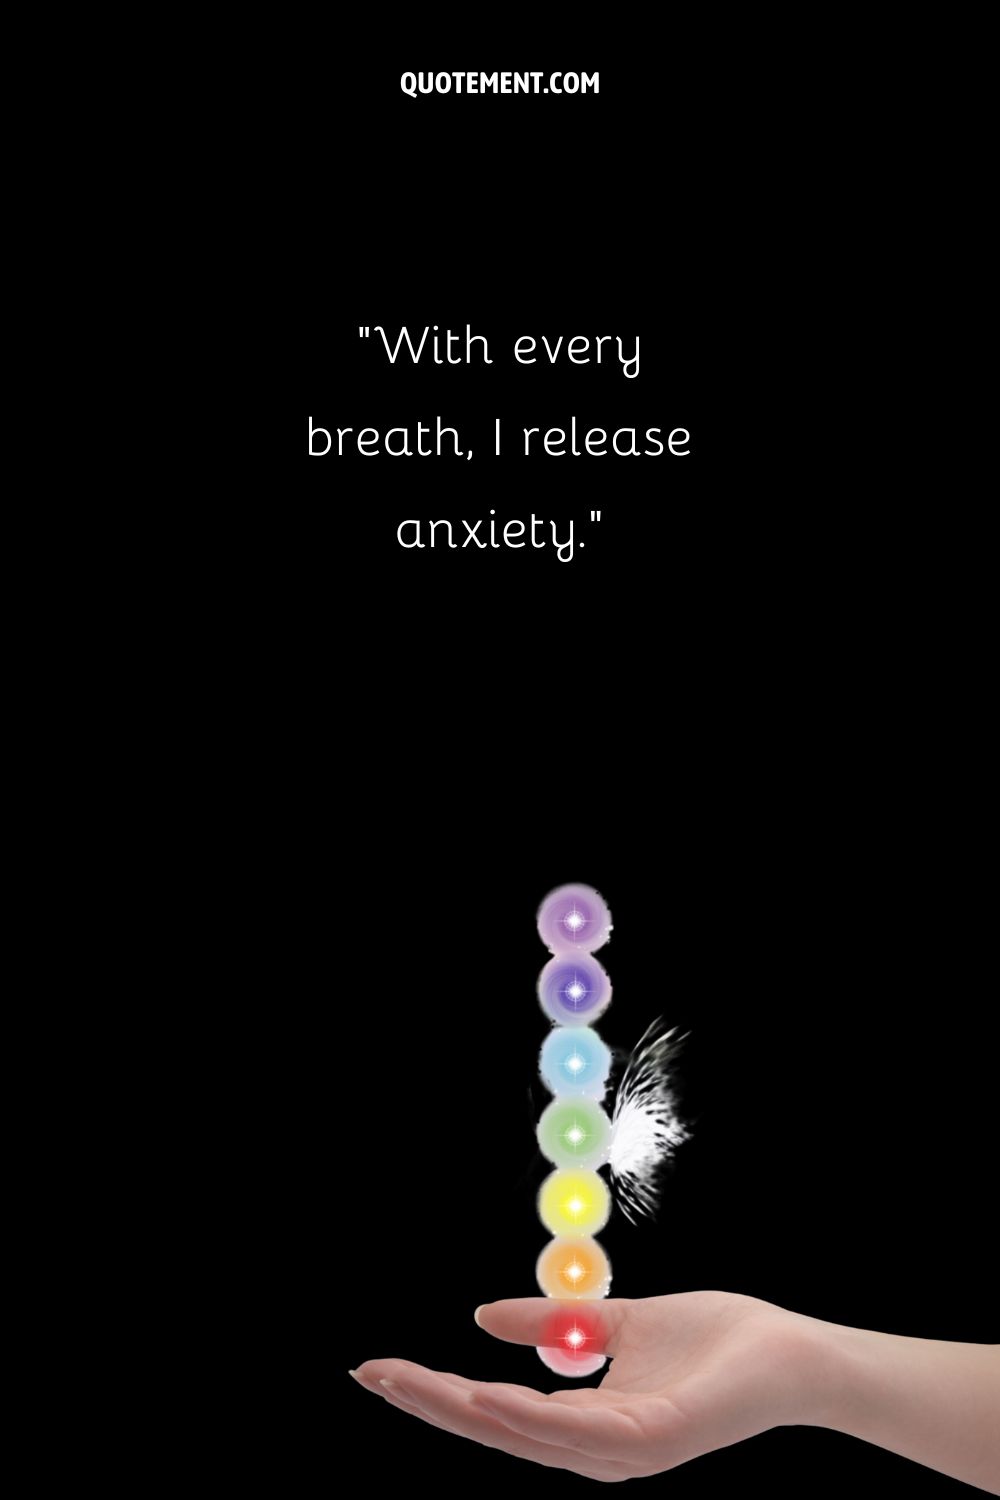 Affirmation for everyone who deals with anxiety or insecurity represented by the hand holding chakra energy
